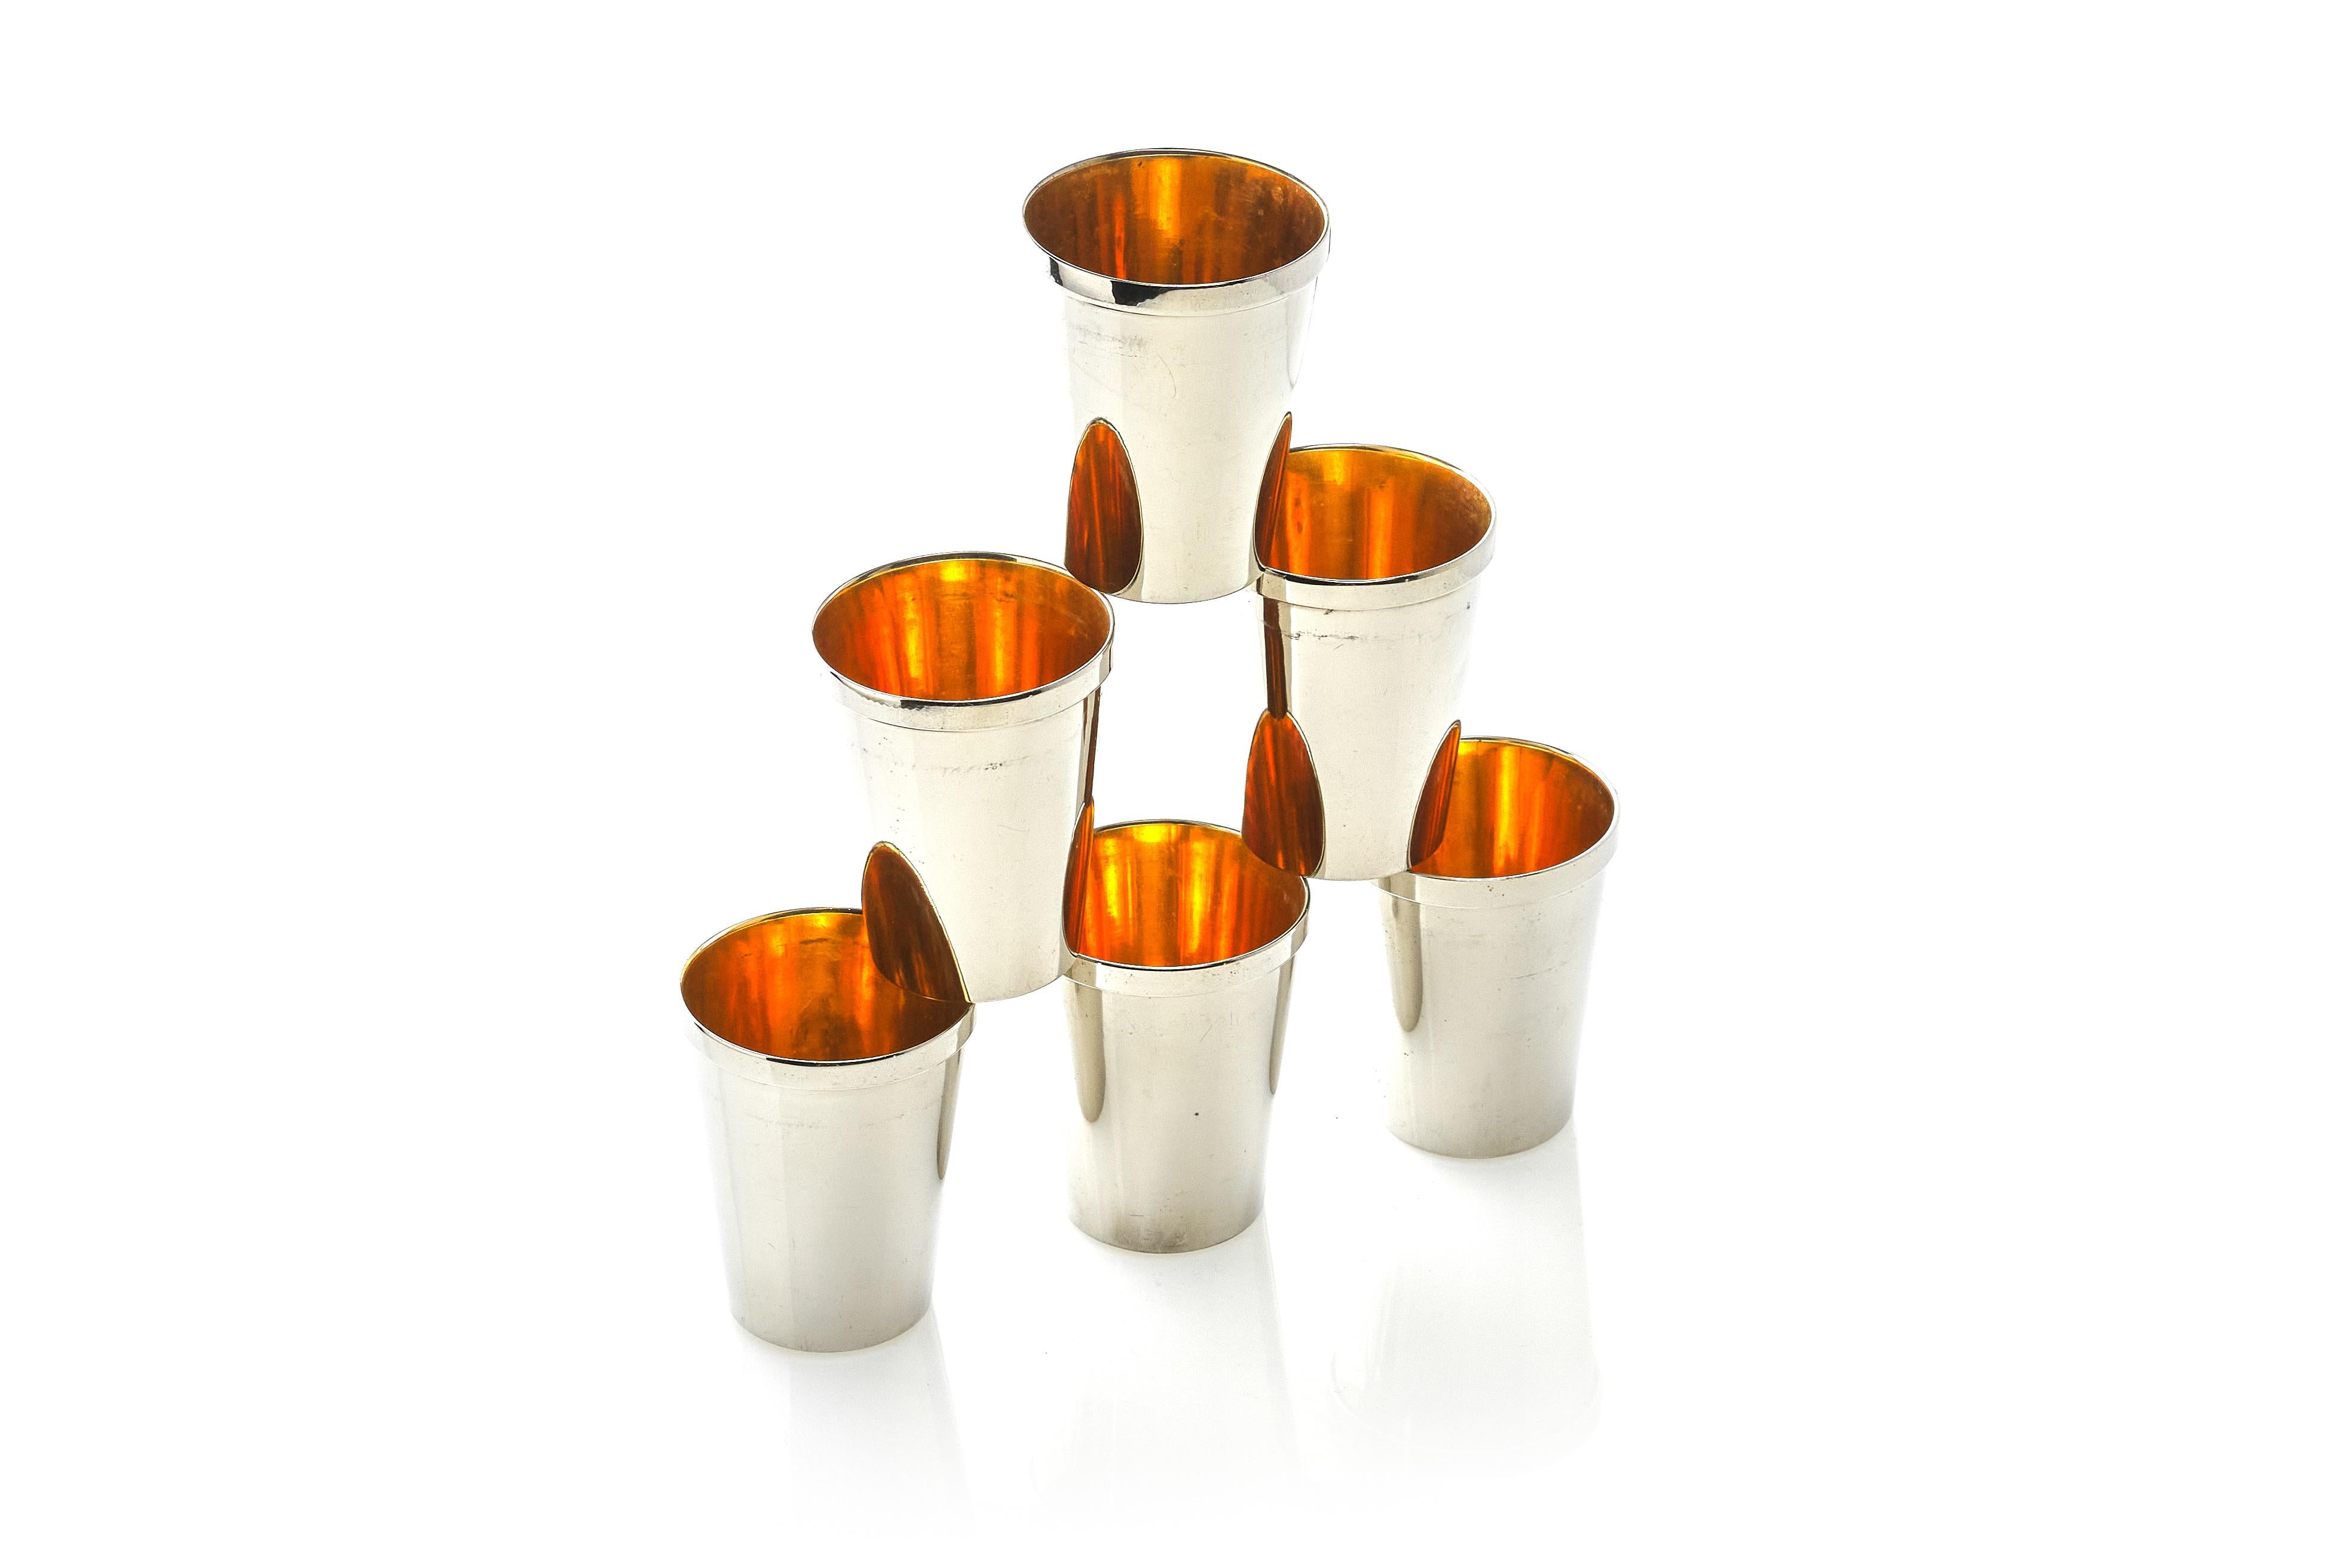 A fine set of 6 gilt-silver shot glasses.

Marked, made in Germany on bottom,

1950s.